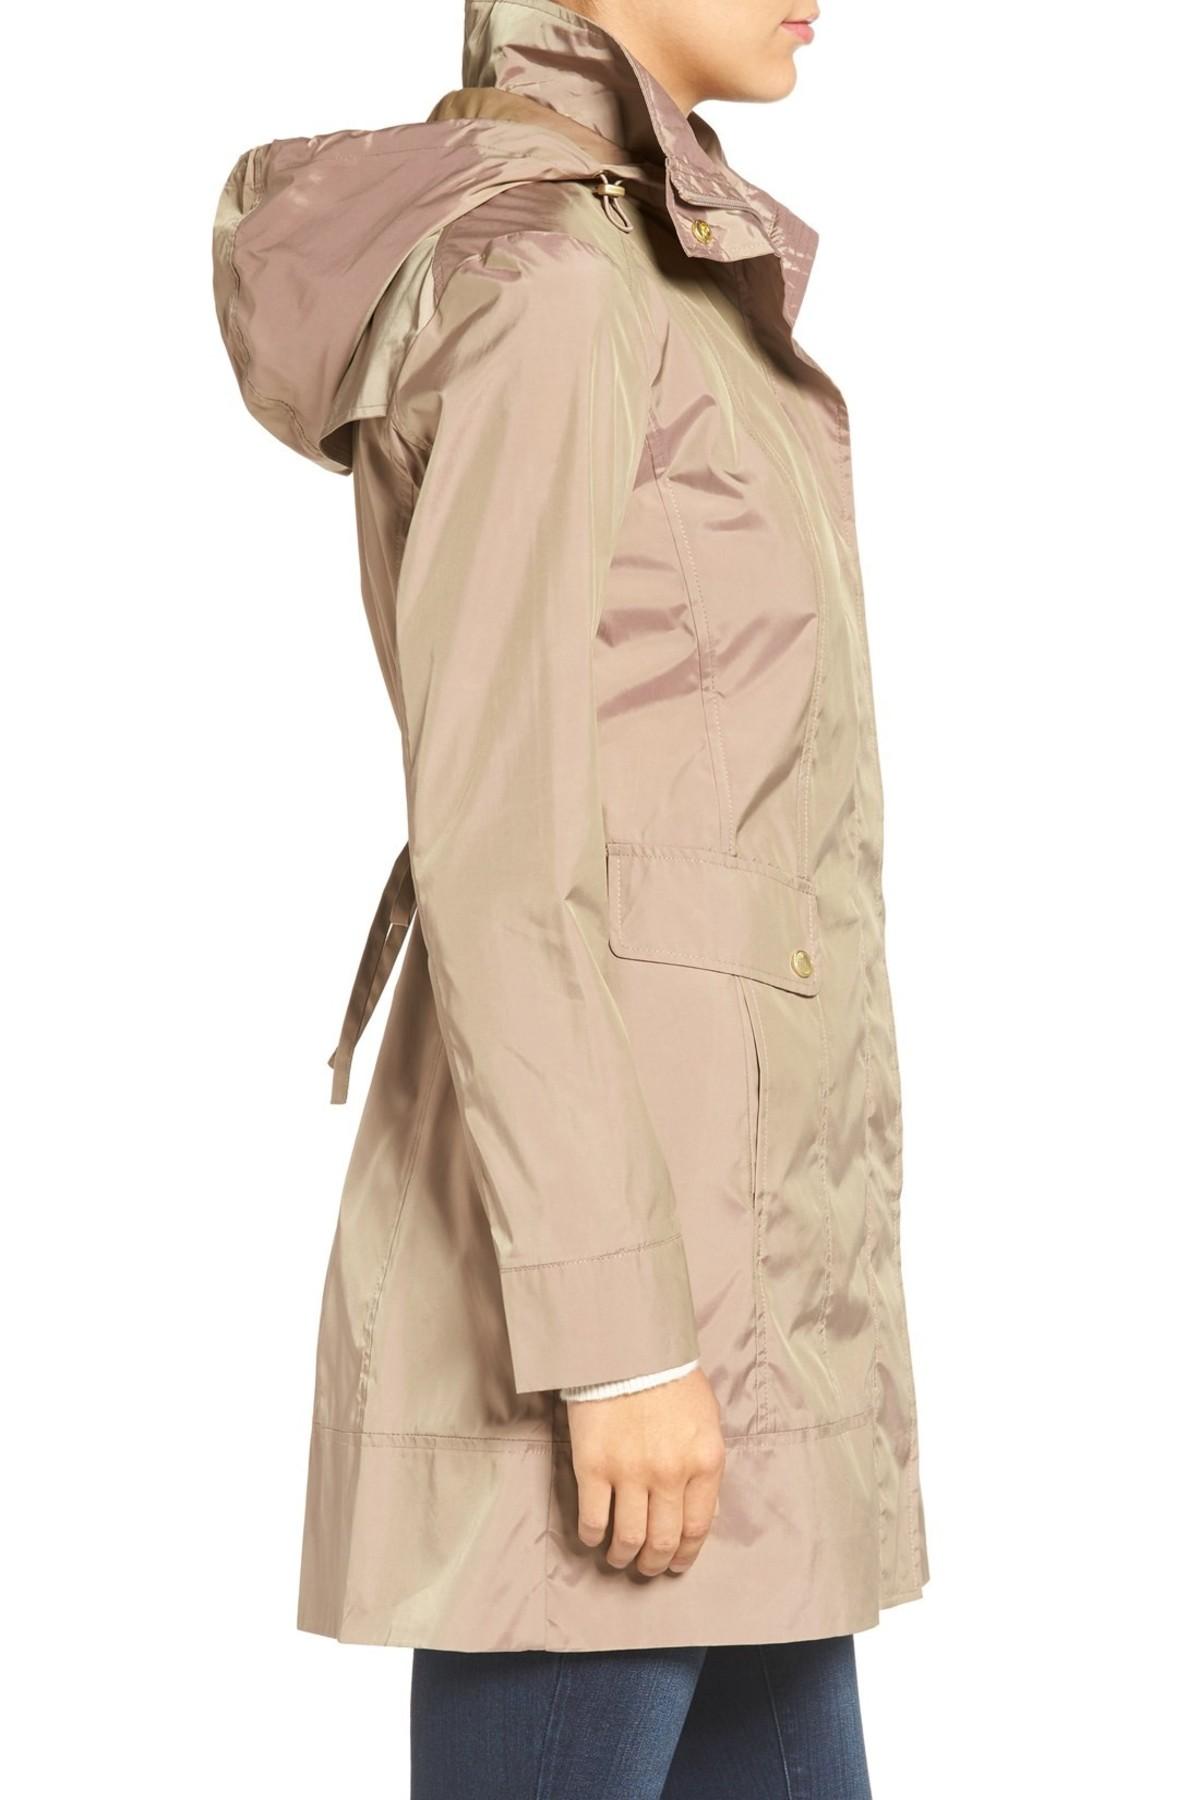 Cole Haan Back Bow Packable Hooded Raincoat (petite) in Natural - Lyst